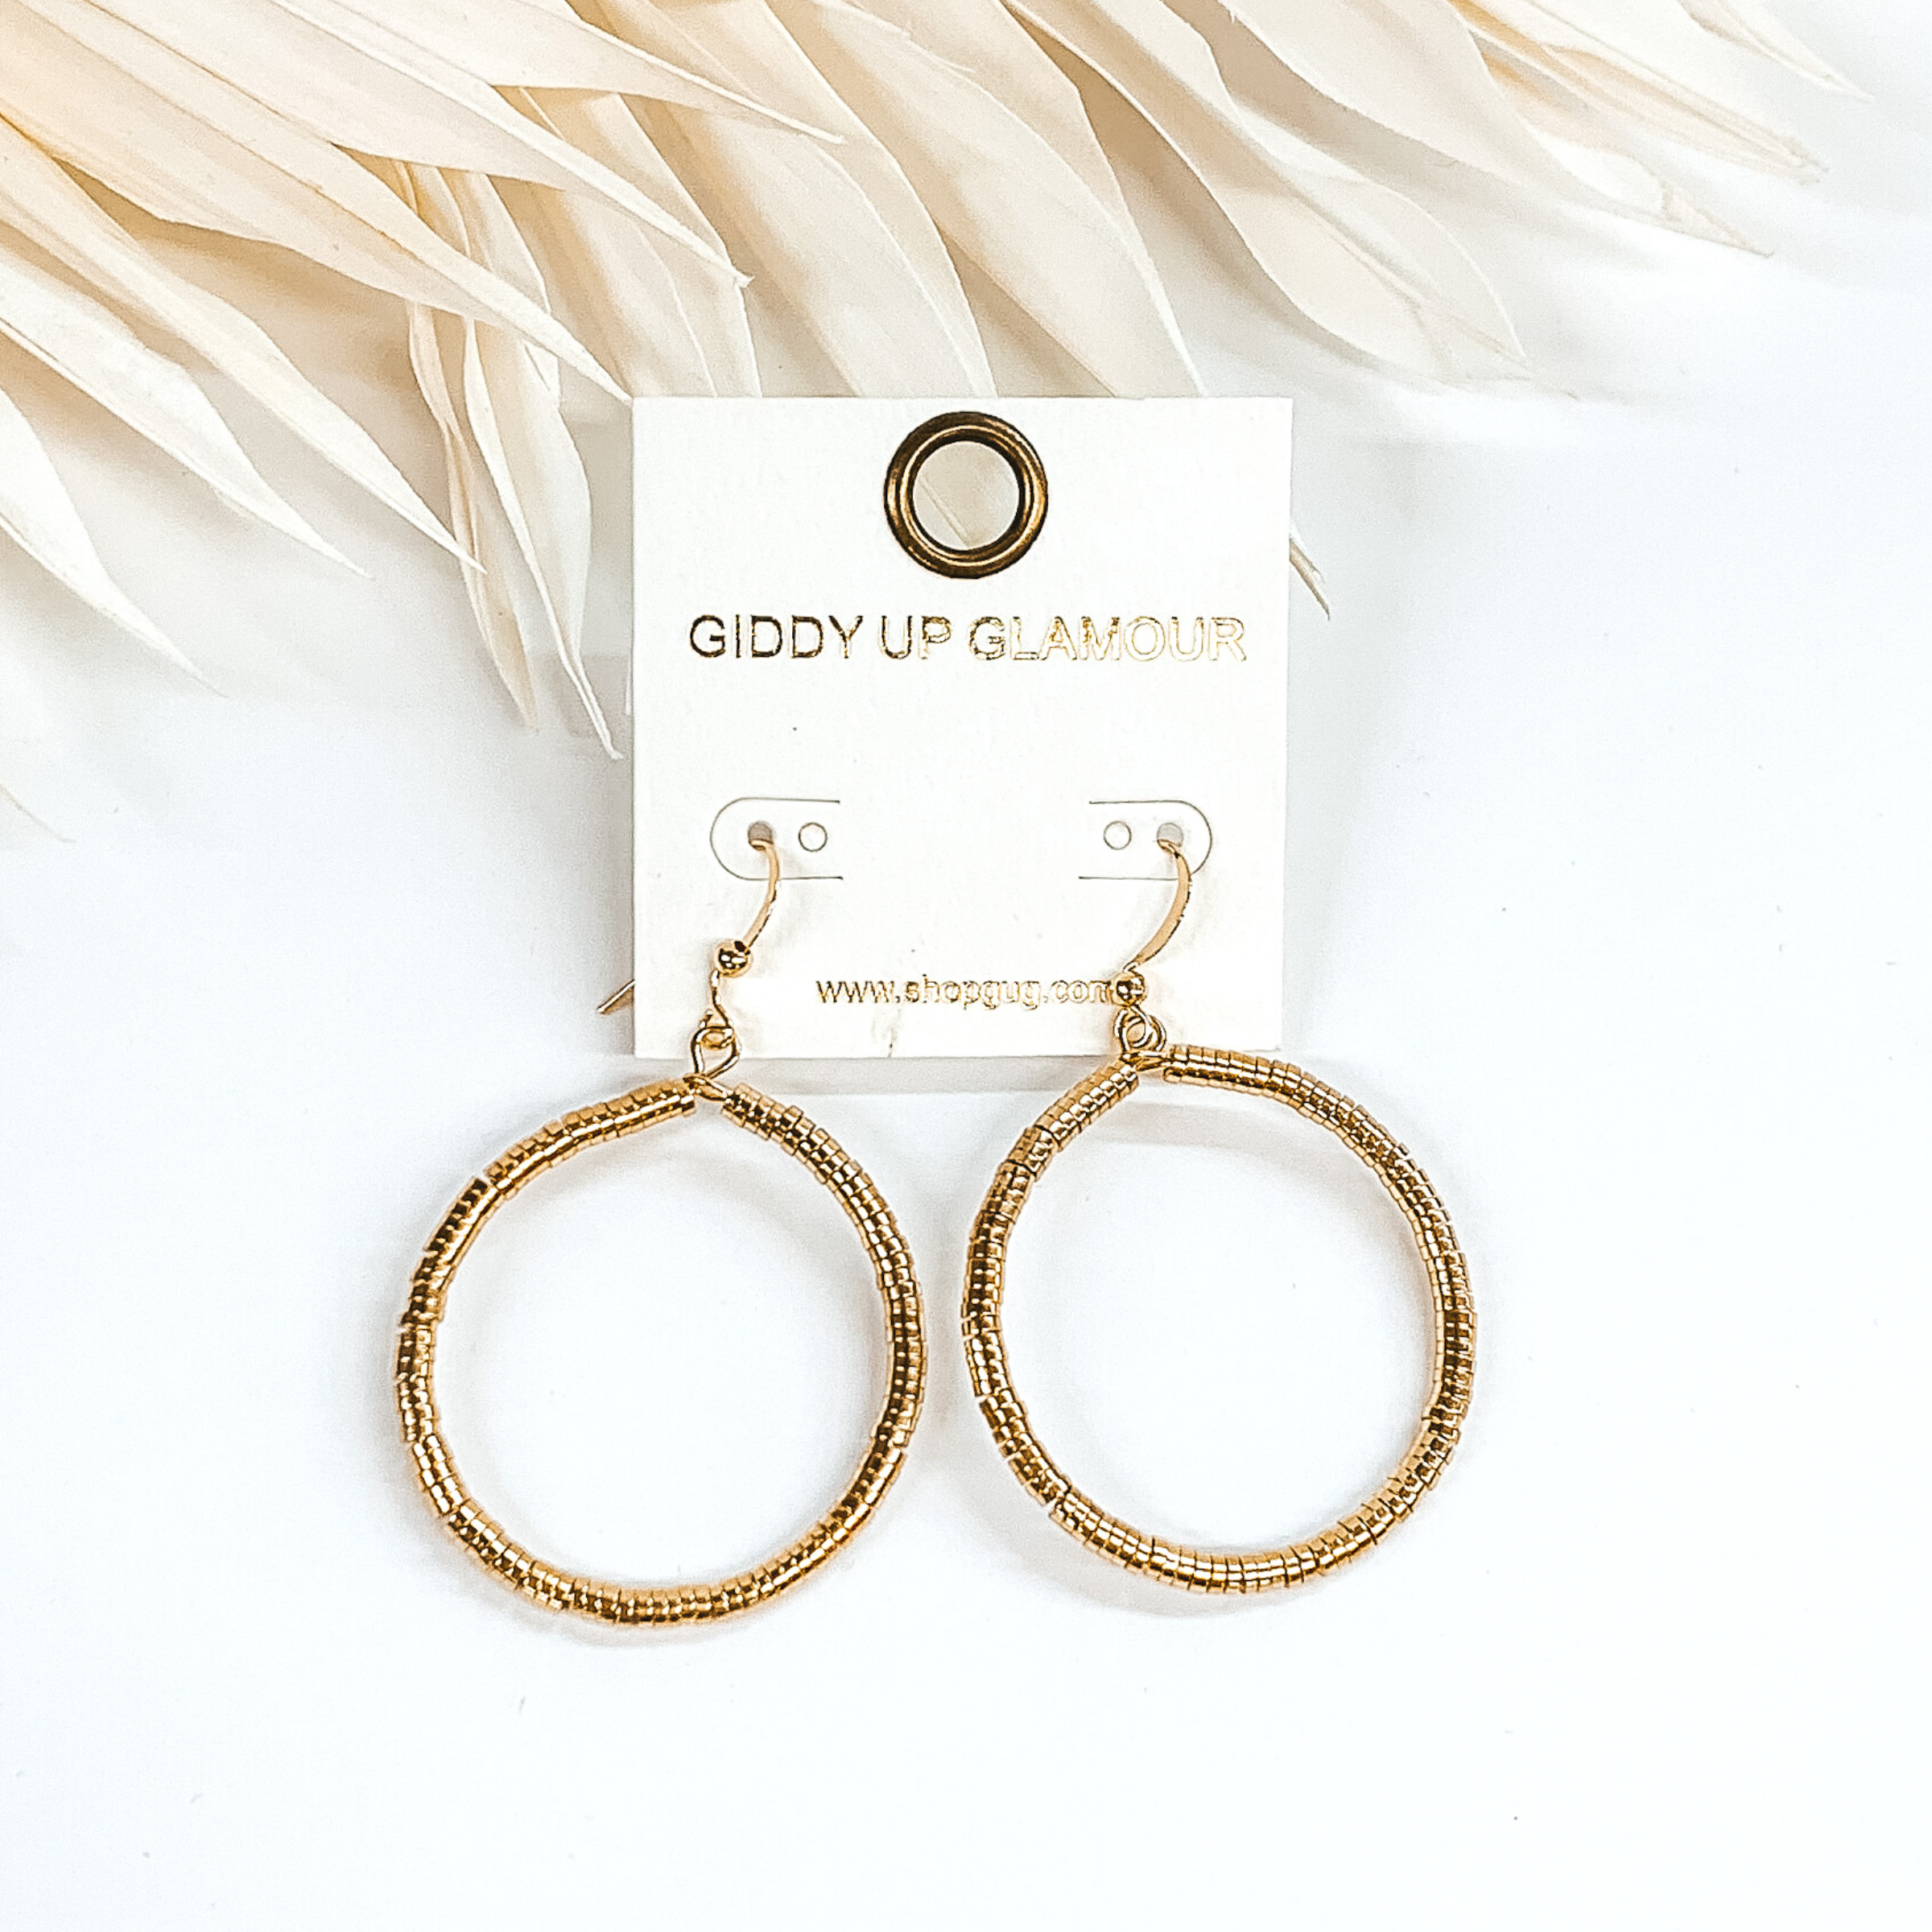 Circle drop disk beaded earrings in gold. These earrings are pictured on a white background with ivory leaves at the top of the picture.